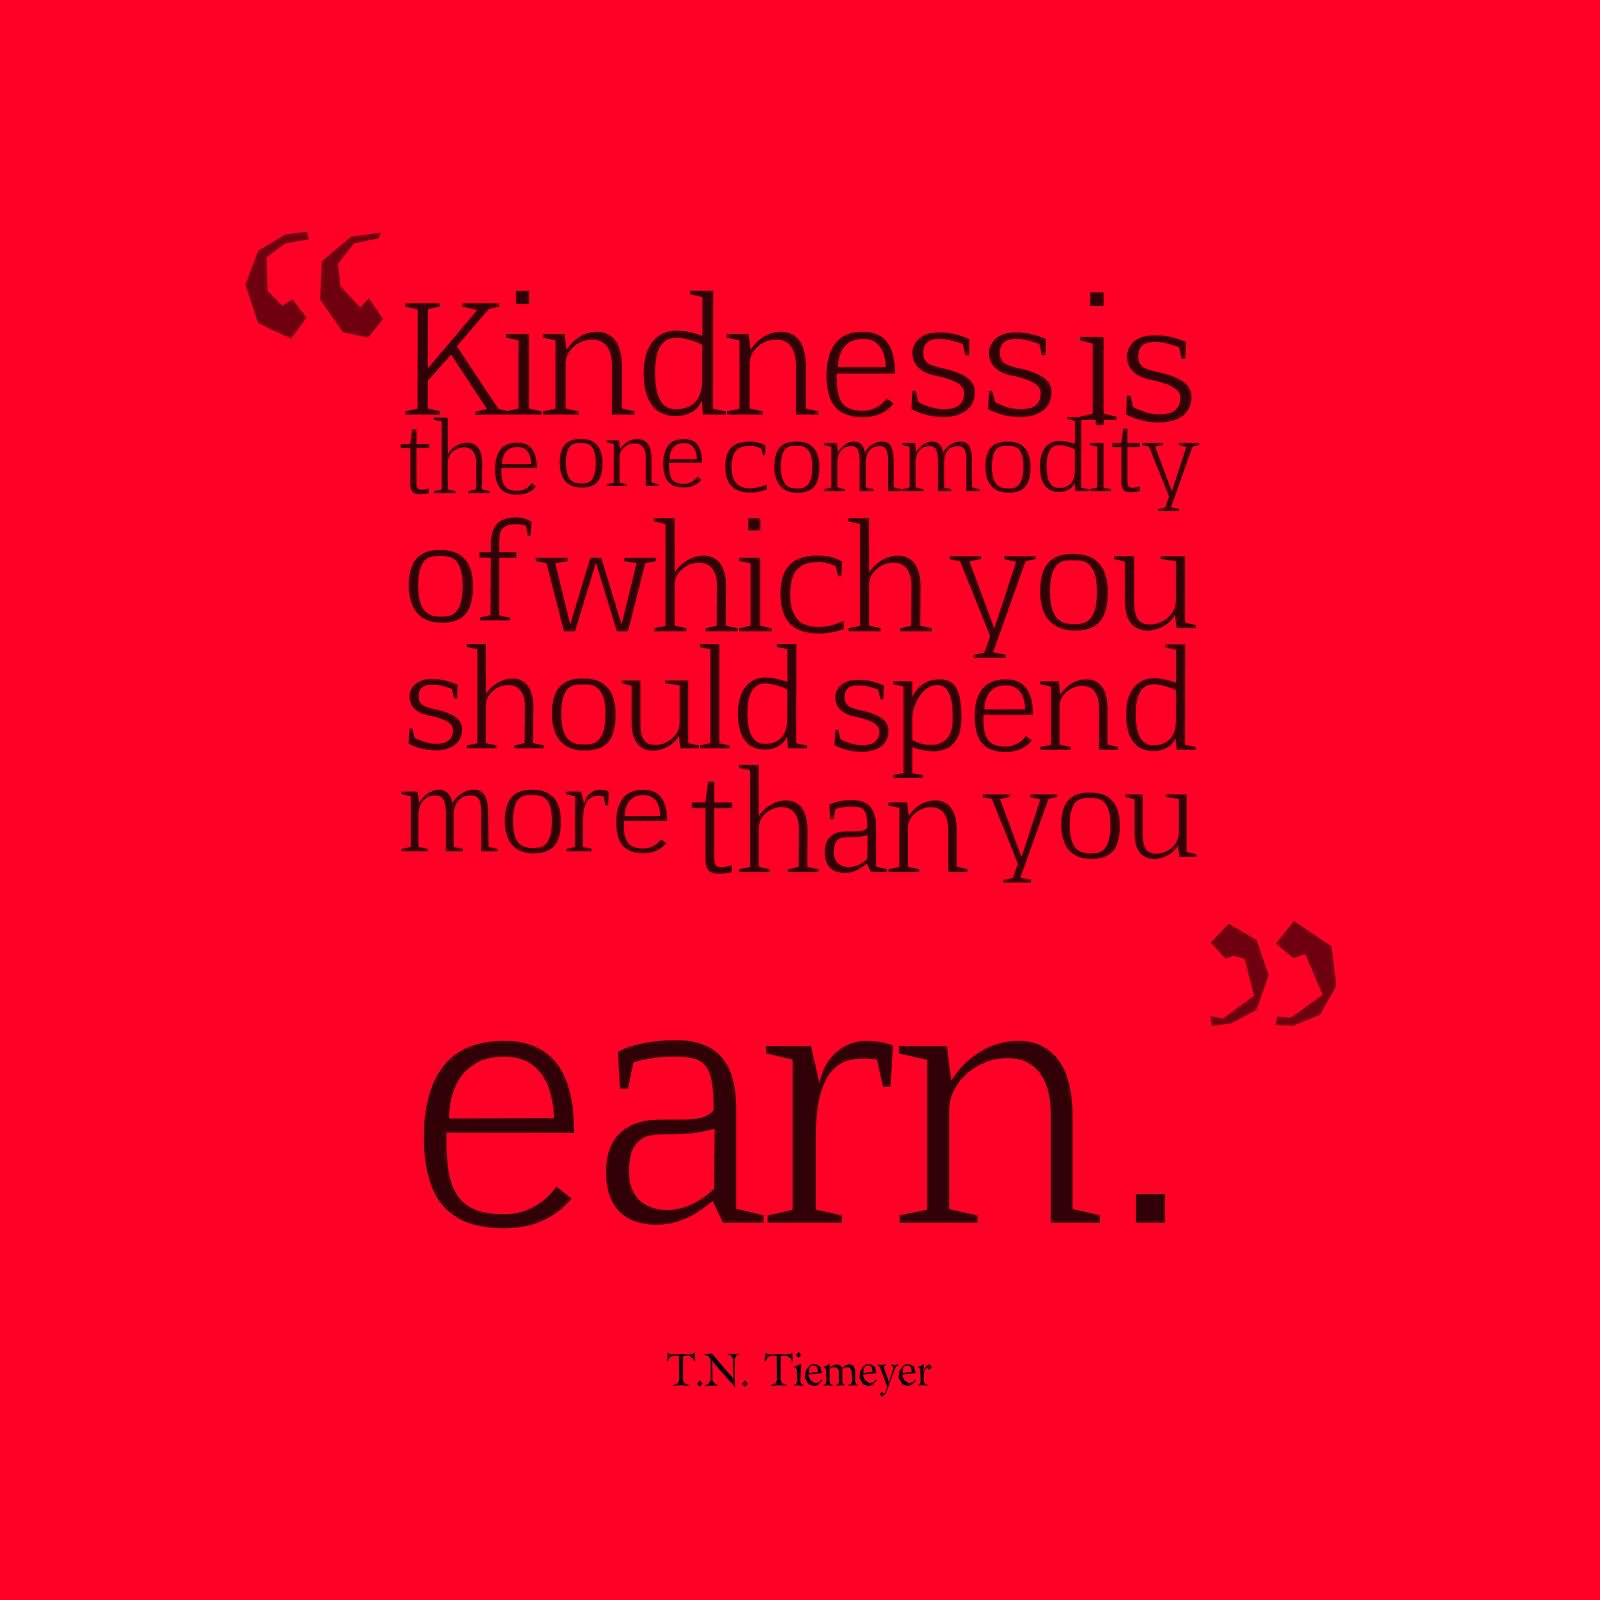 Kindness is the one commodity of which you should spend more than you earn.